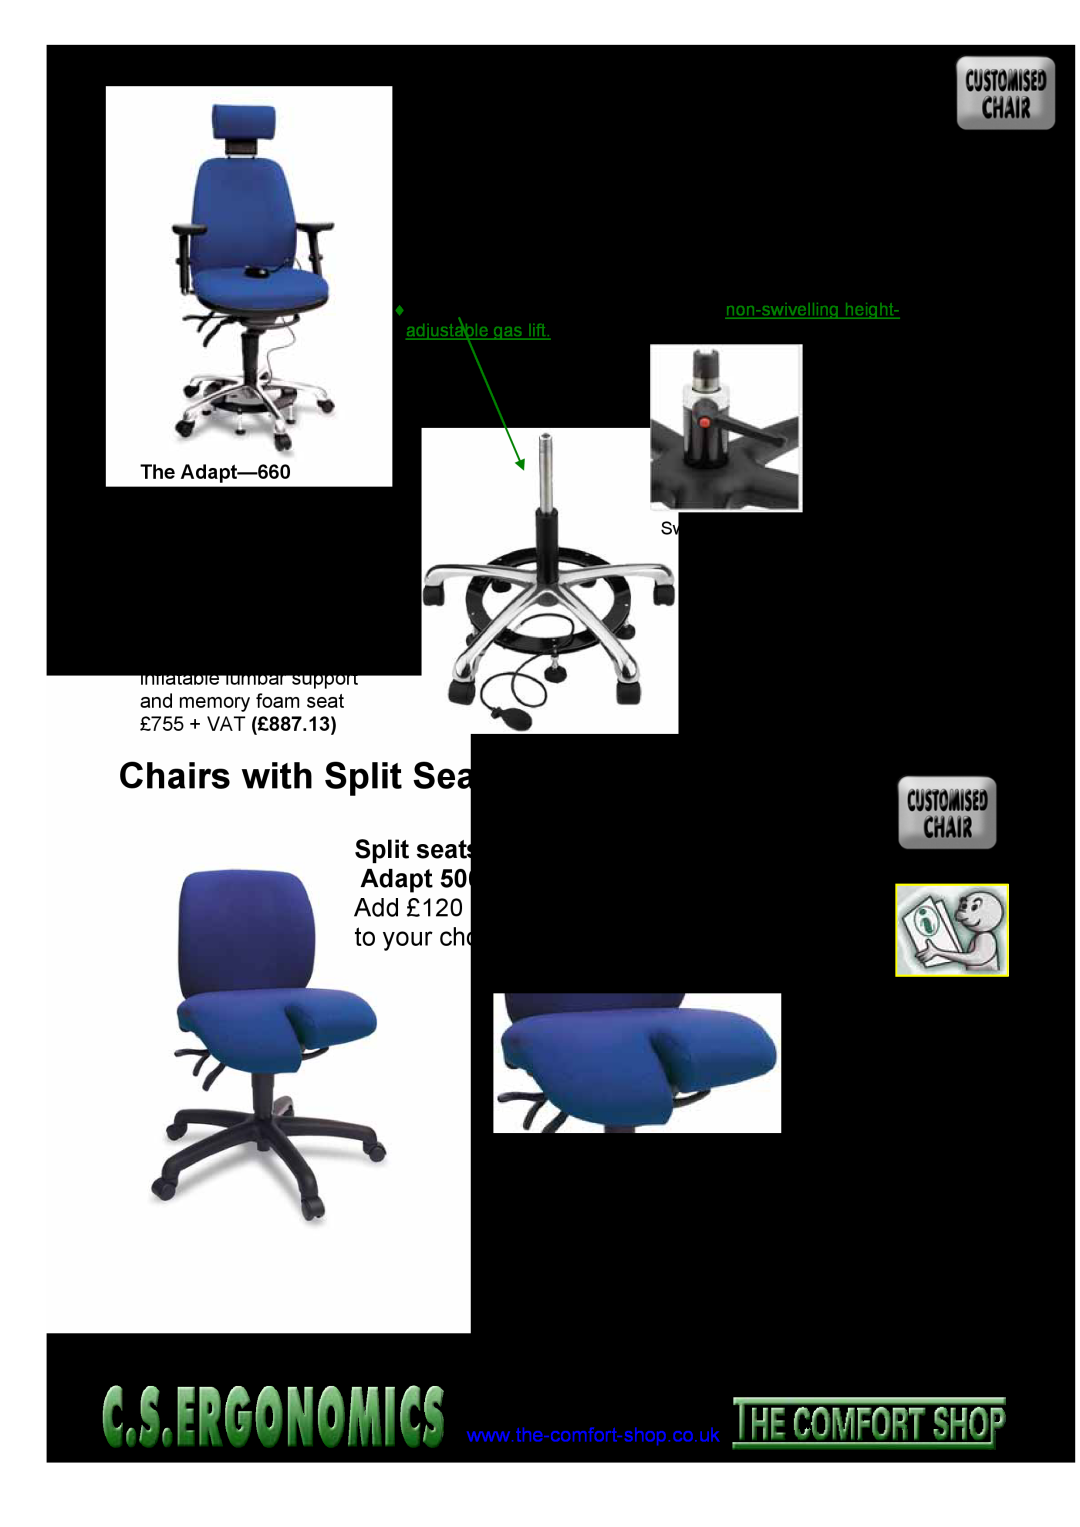 Fellowes RH 300 Chairs with Movement and Swivel Locks, Chairs with Split Seat Options, Movement Lock, Chair swivel lock 